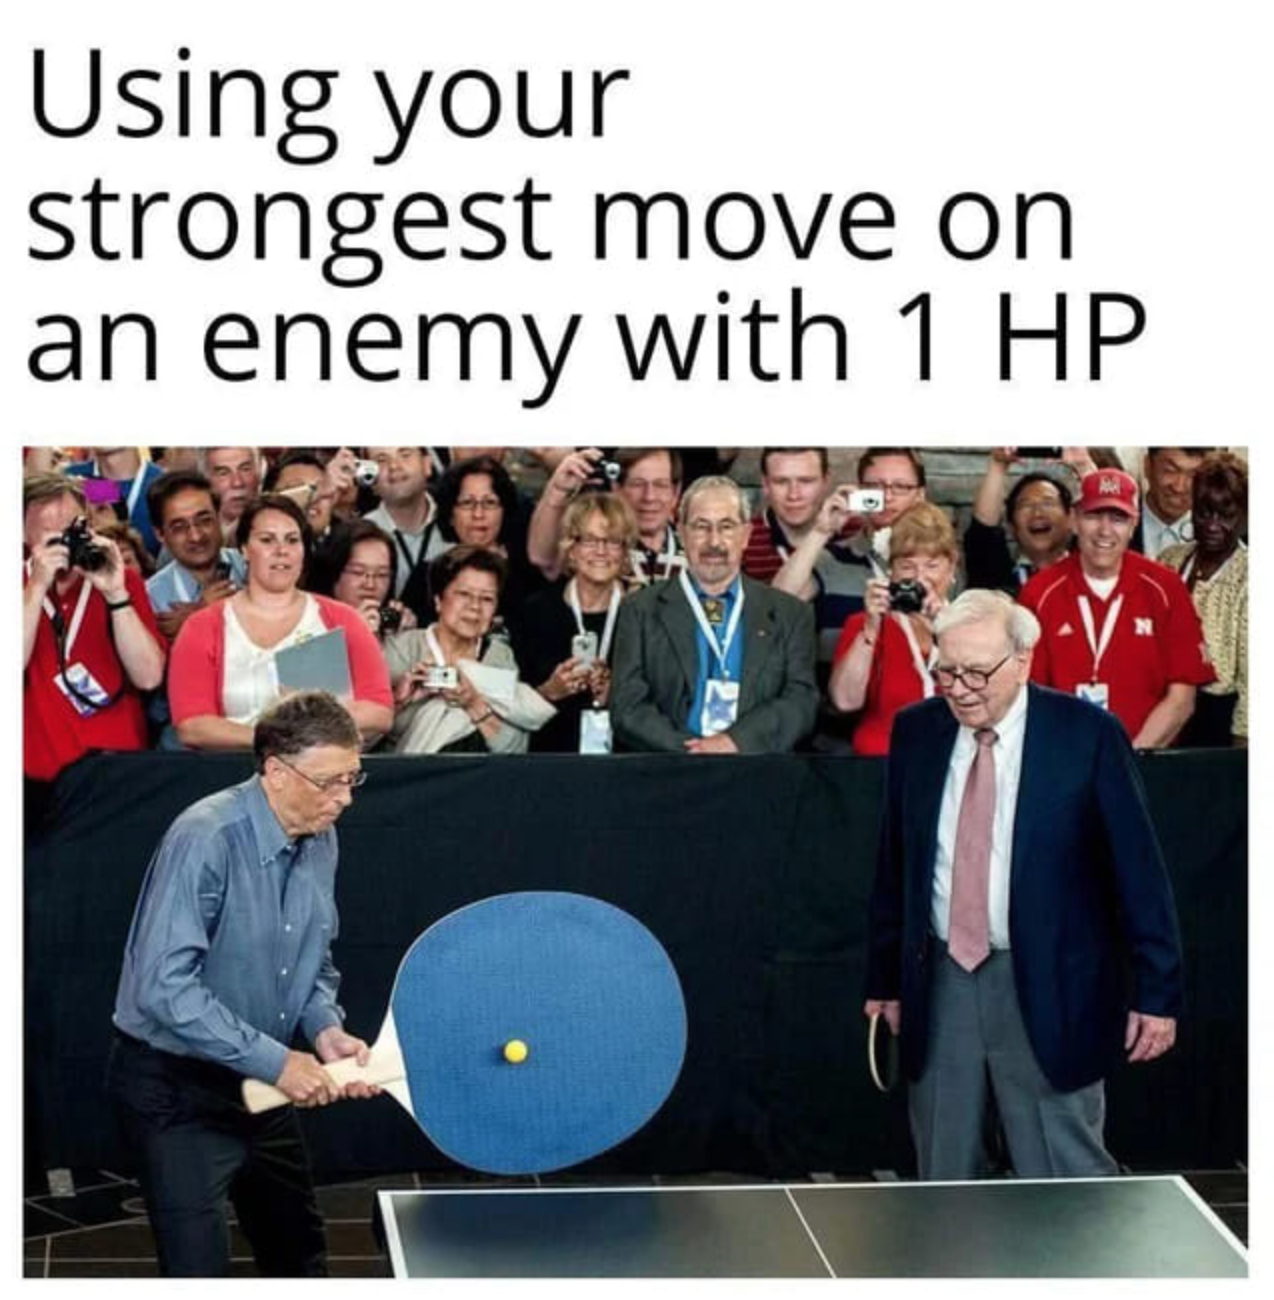 gaming memes - bing bing bong meme - Using your strongest move on an enemy with 1 Hp